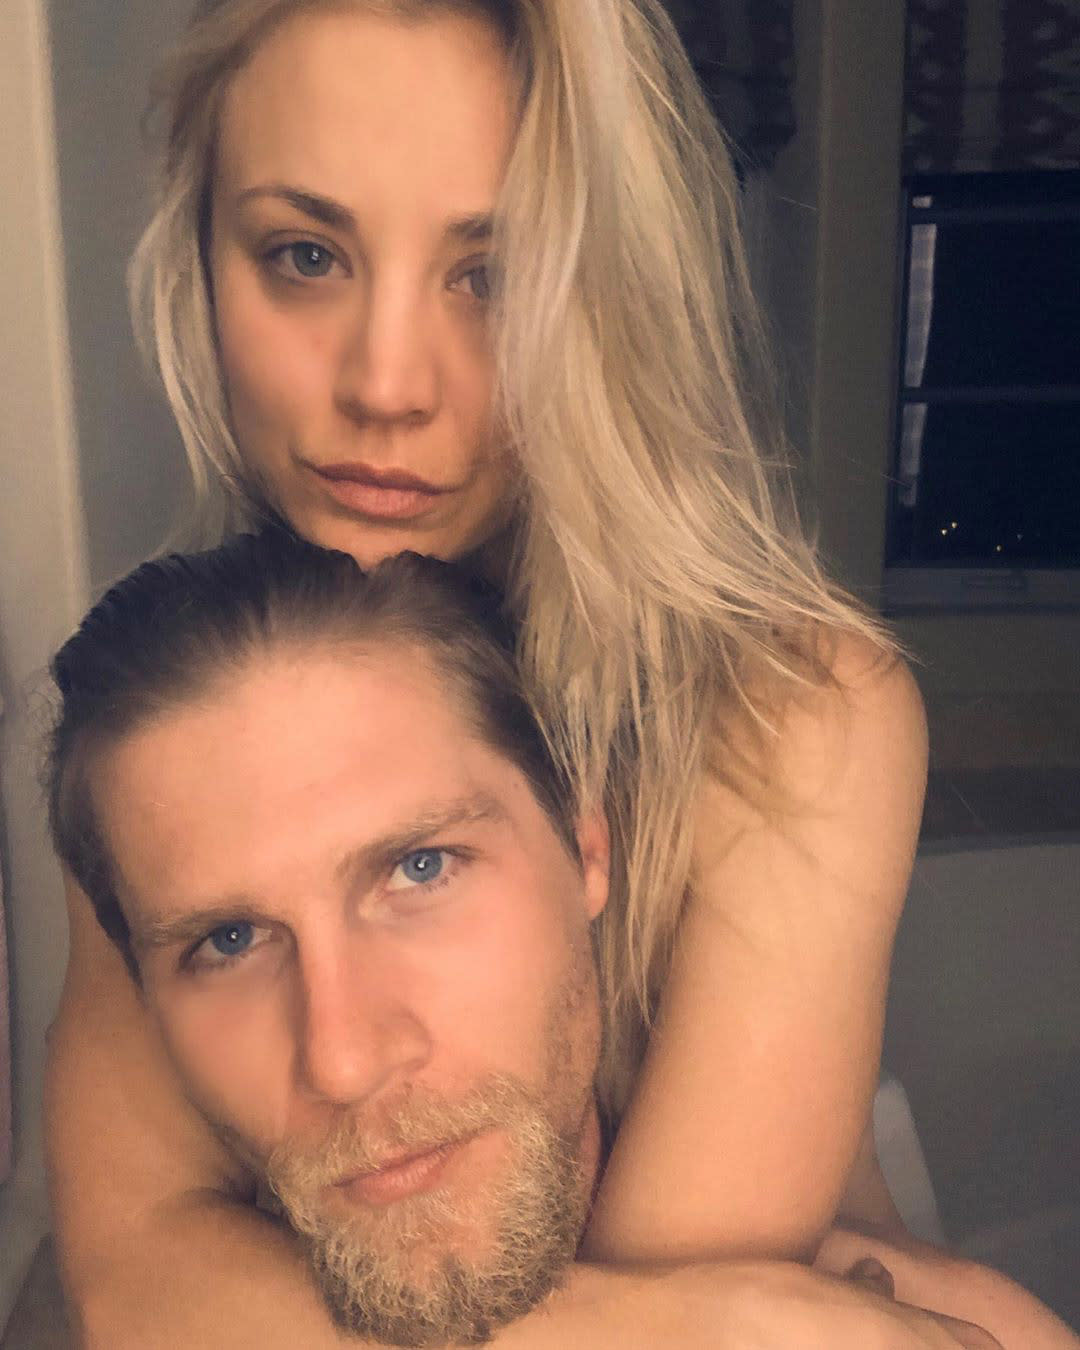 Kayley Cuoco - Kaley Cuoco's Husband Ruins Sexy Photo by Saying They Look Like Siblings:  'Moment Over'